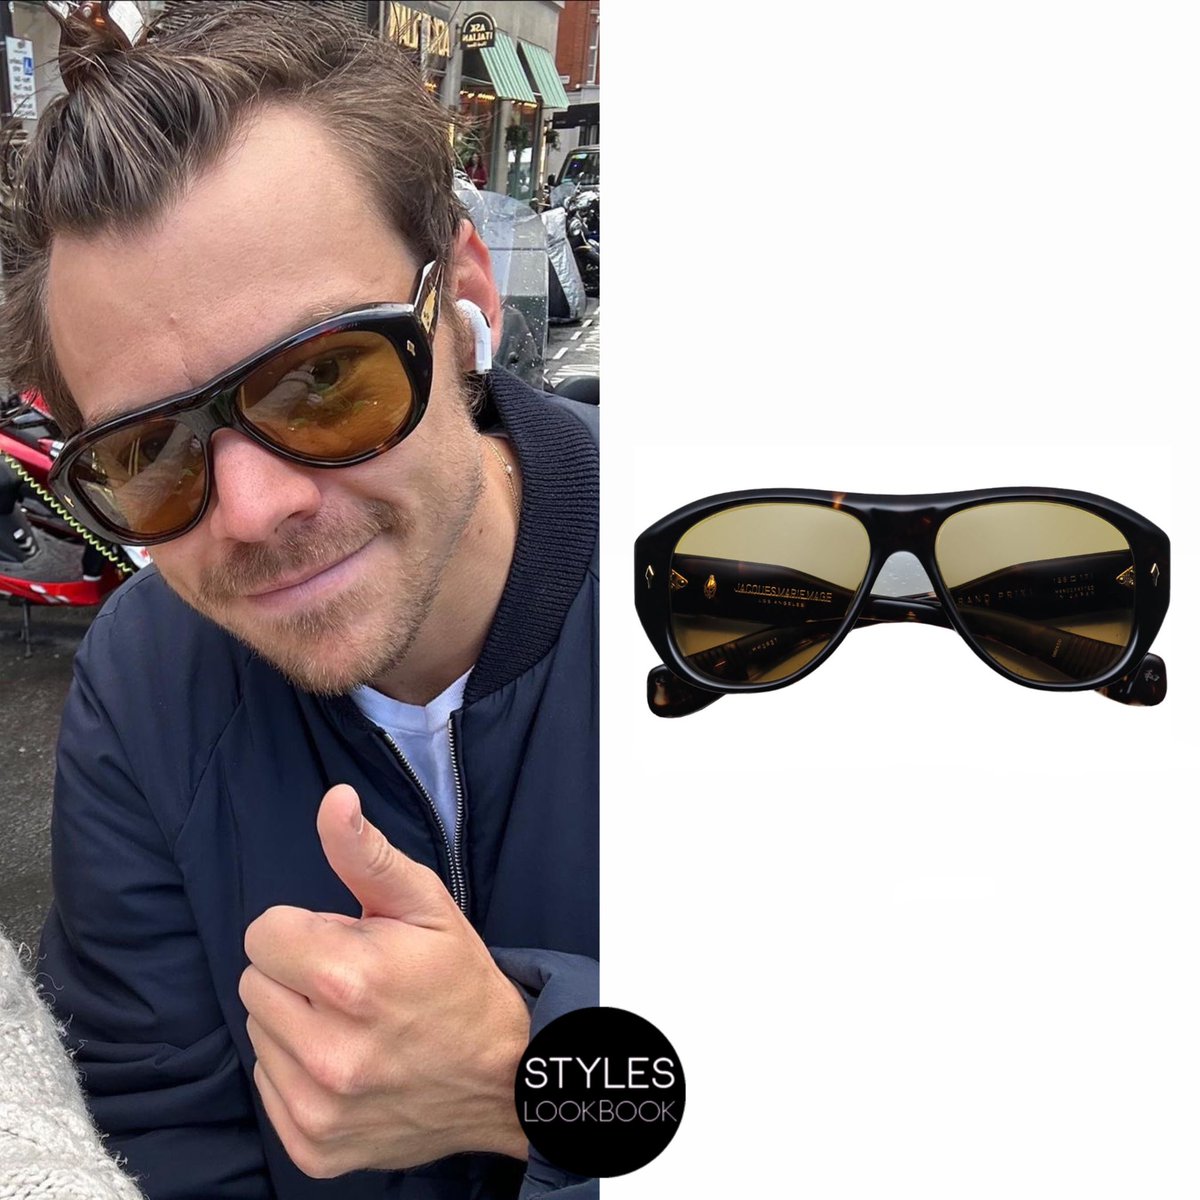 Out in London, Harry was pictured wearing #JacquesMarieMage Grand Prix sunglasses in dark havana ($820).
styleslookbook.com/post/730180139…

📸 annabayne